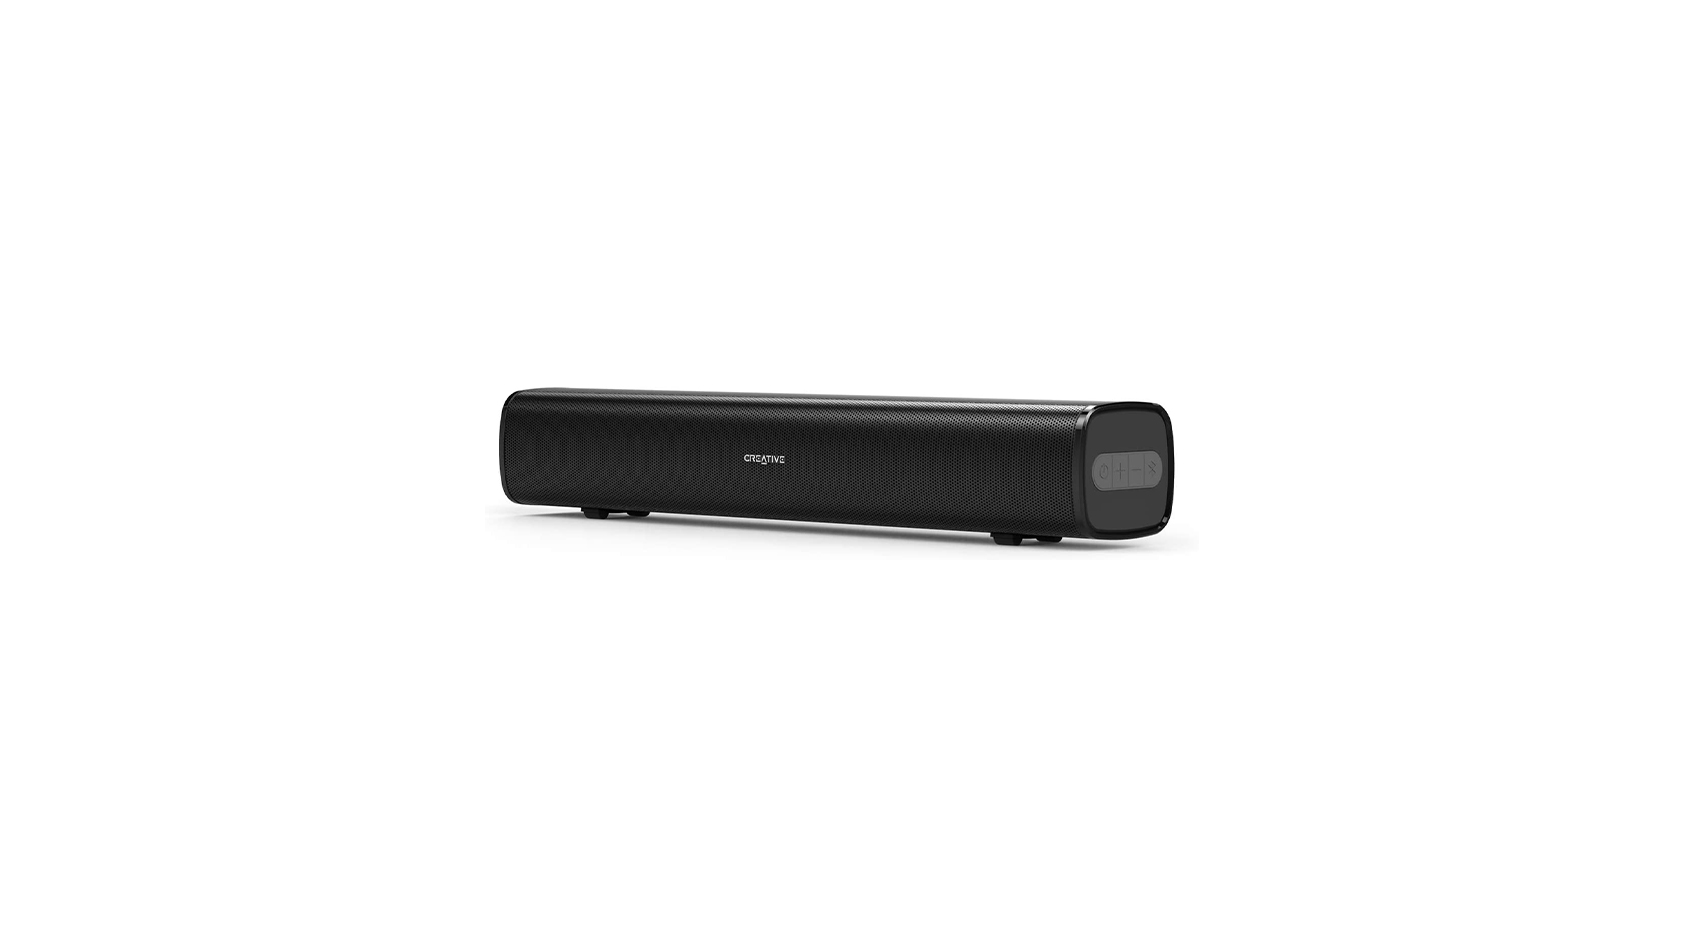 A product render of the Creative Stage Air soundbar in black against a white background.